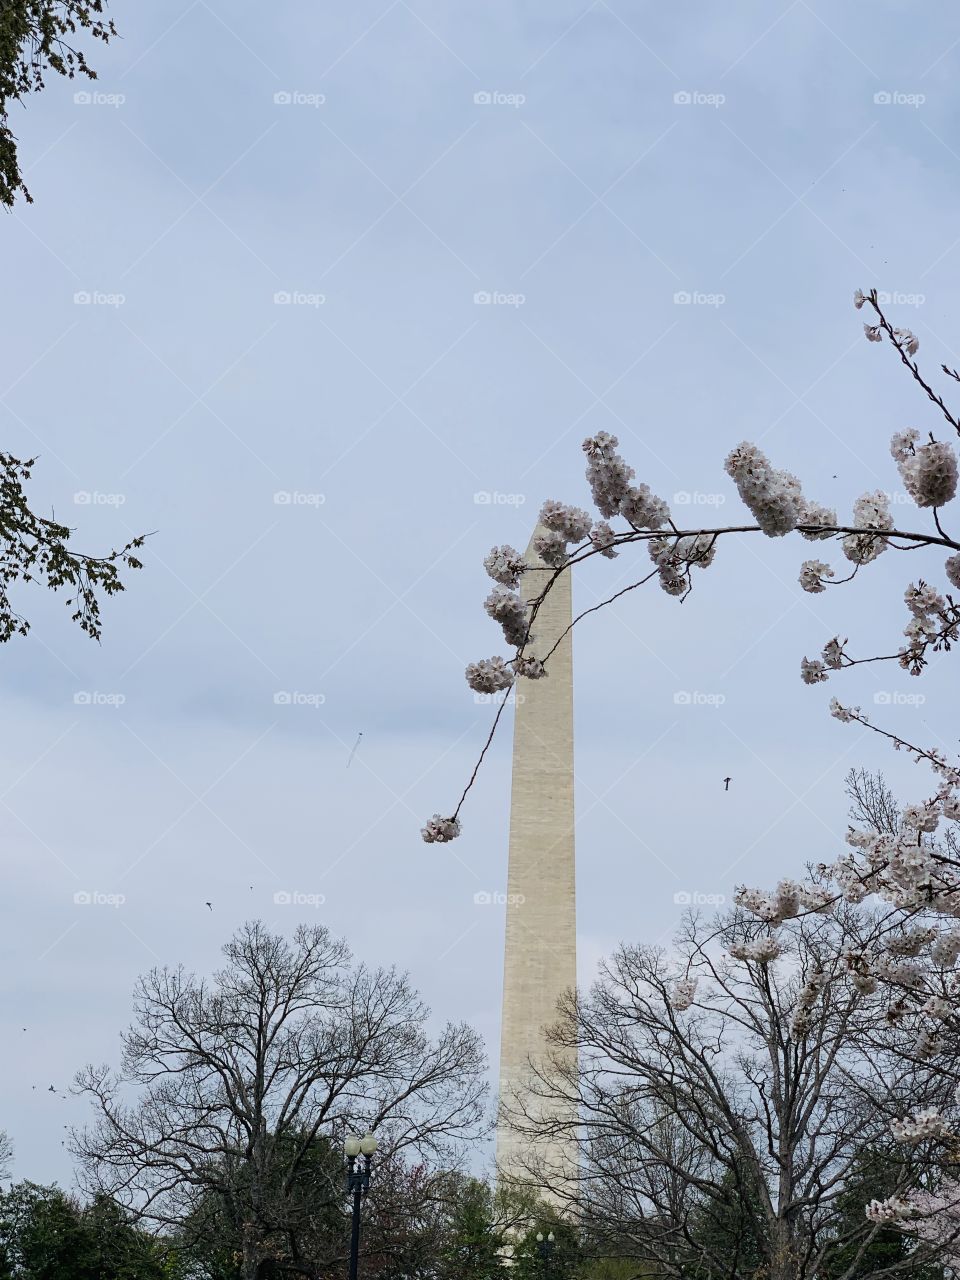 Cherry blossoms and the Washington Monument